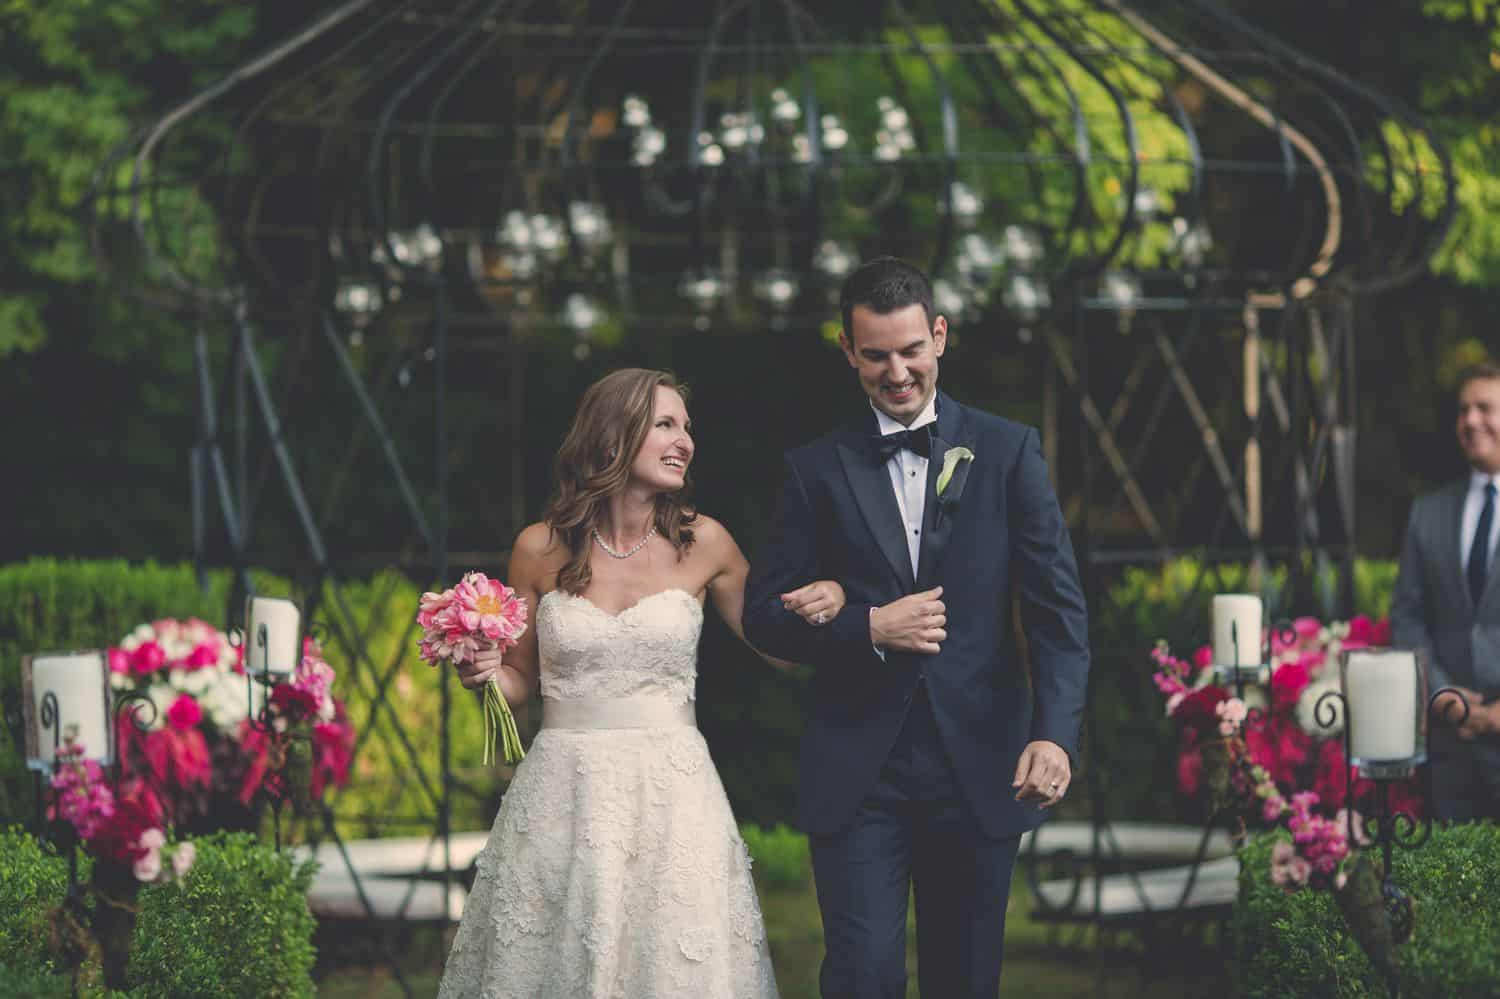 Bride and groom process out of their garden ceremony surrounded by pink flowers and greenery. By Harris & Co.